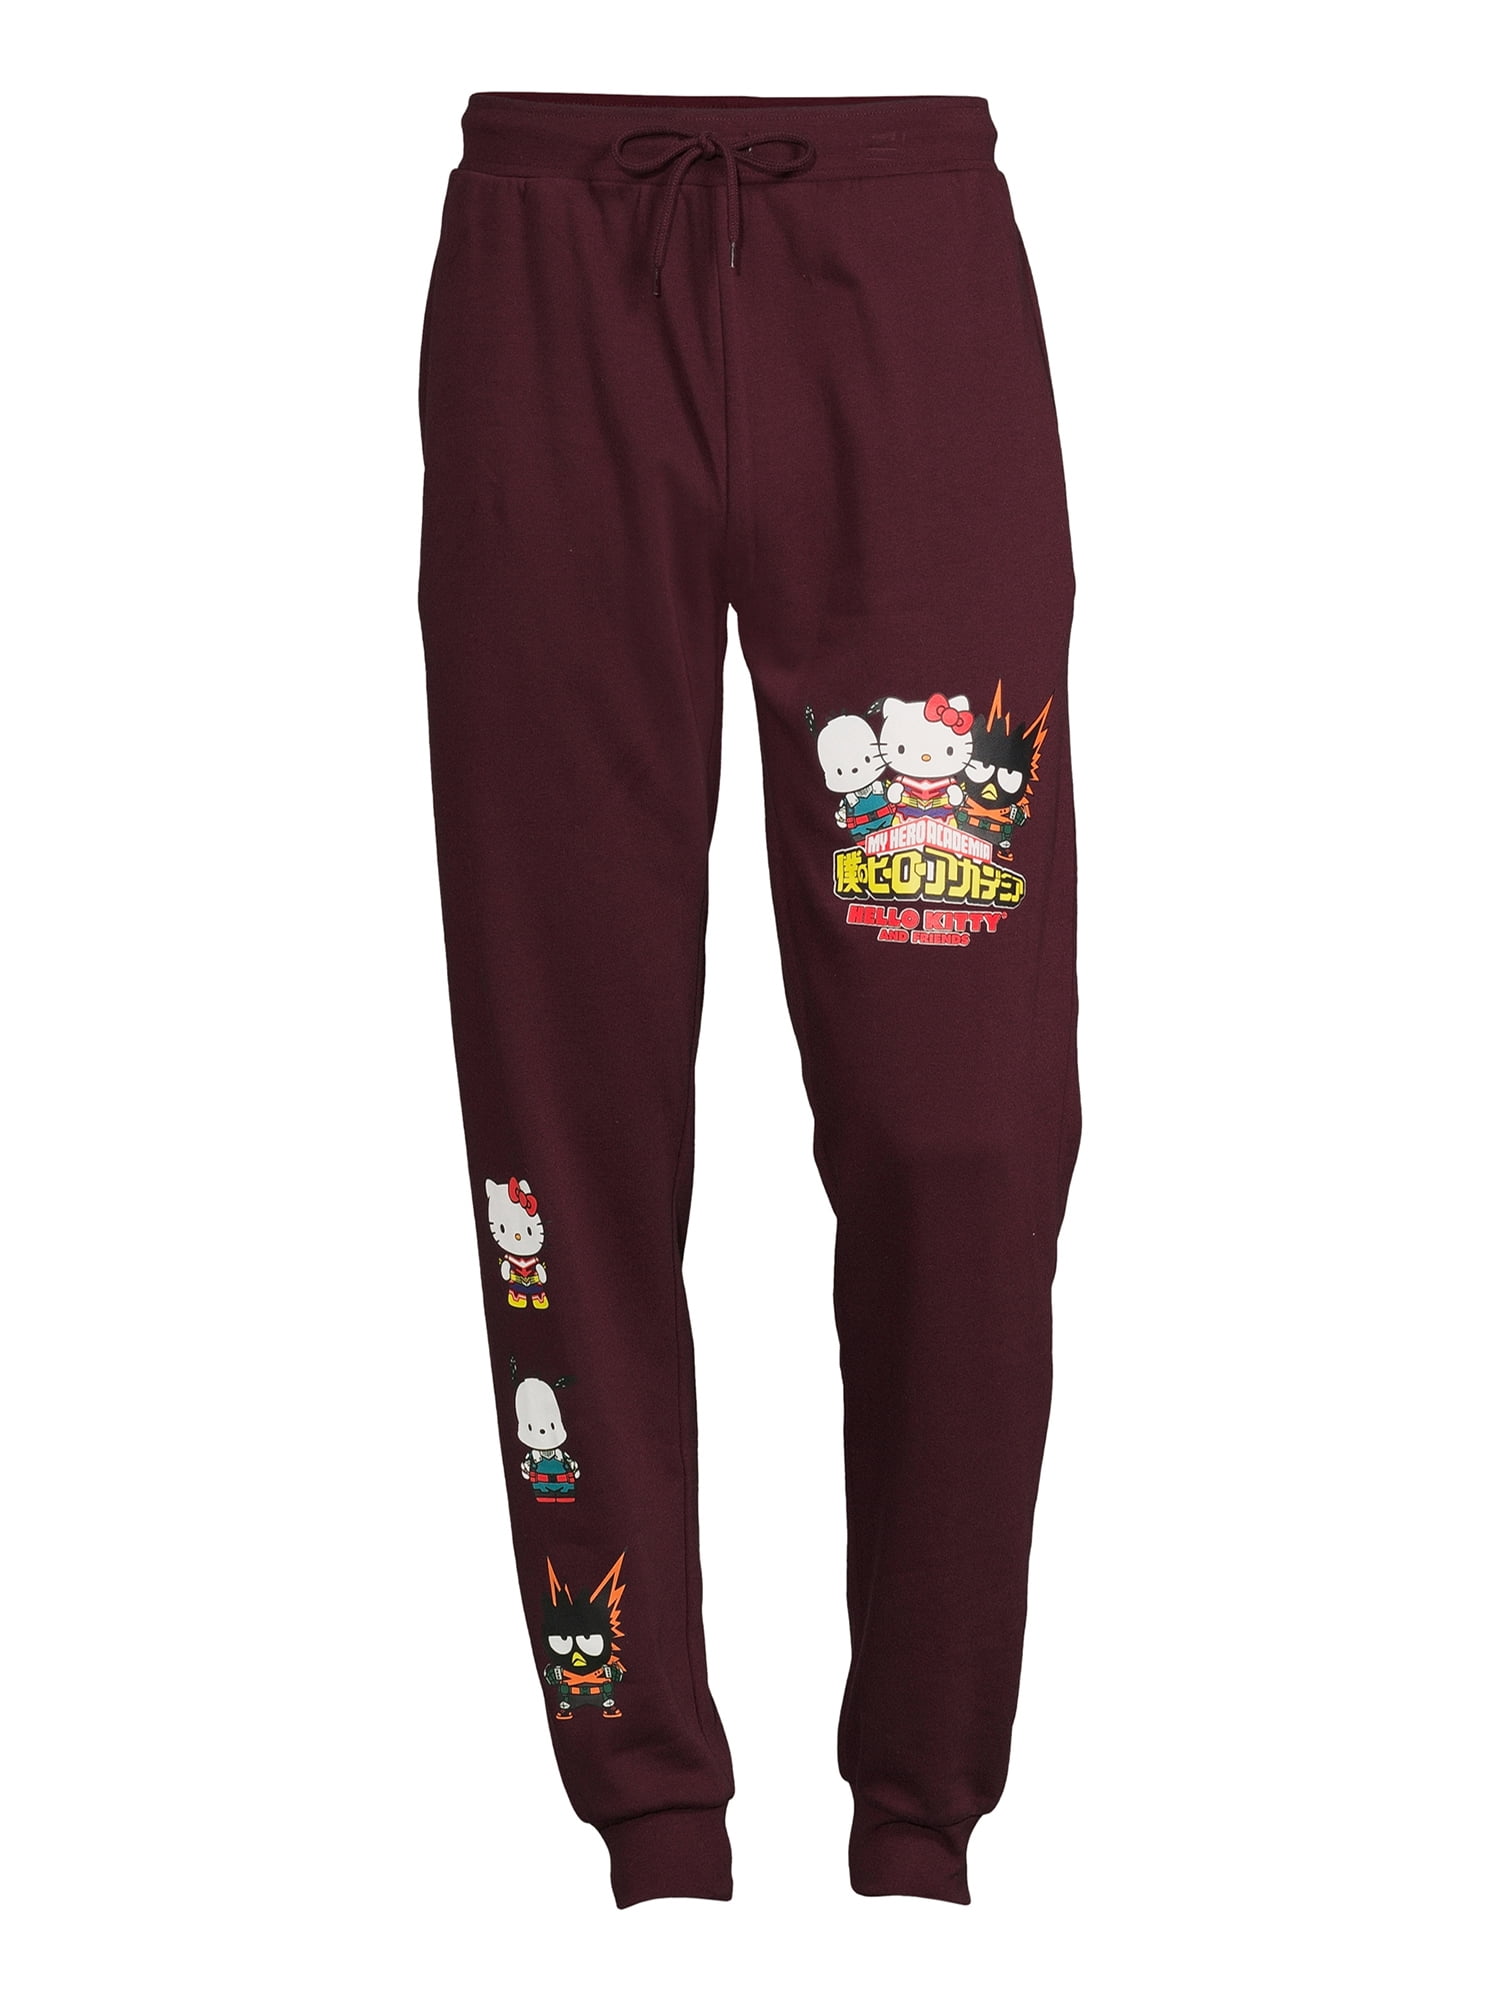 Hello Kitty x Cup Noodles Character Tie Dye Print Joggers-Small (28-30) 